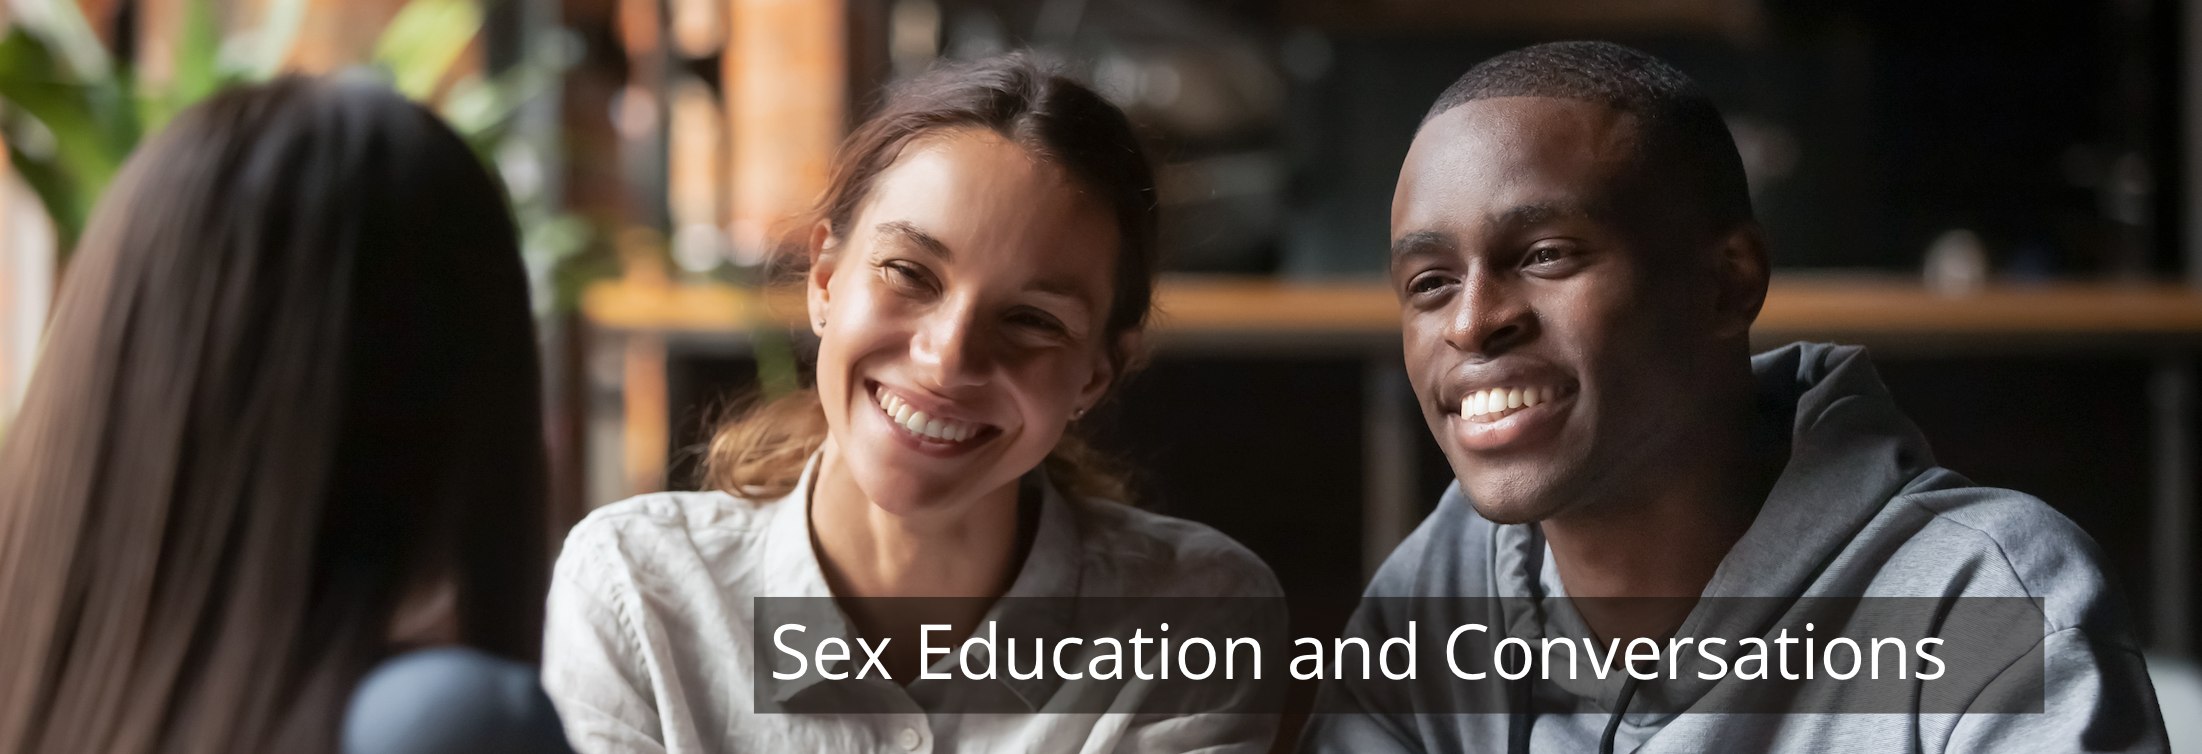 Sex Education and Conversations